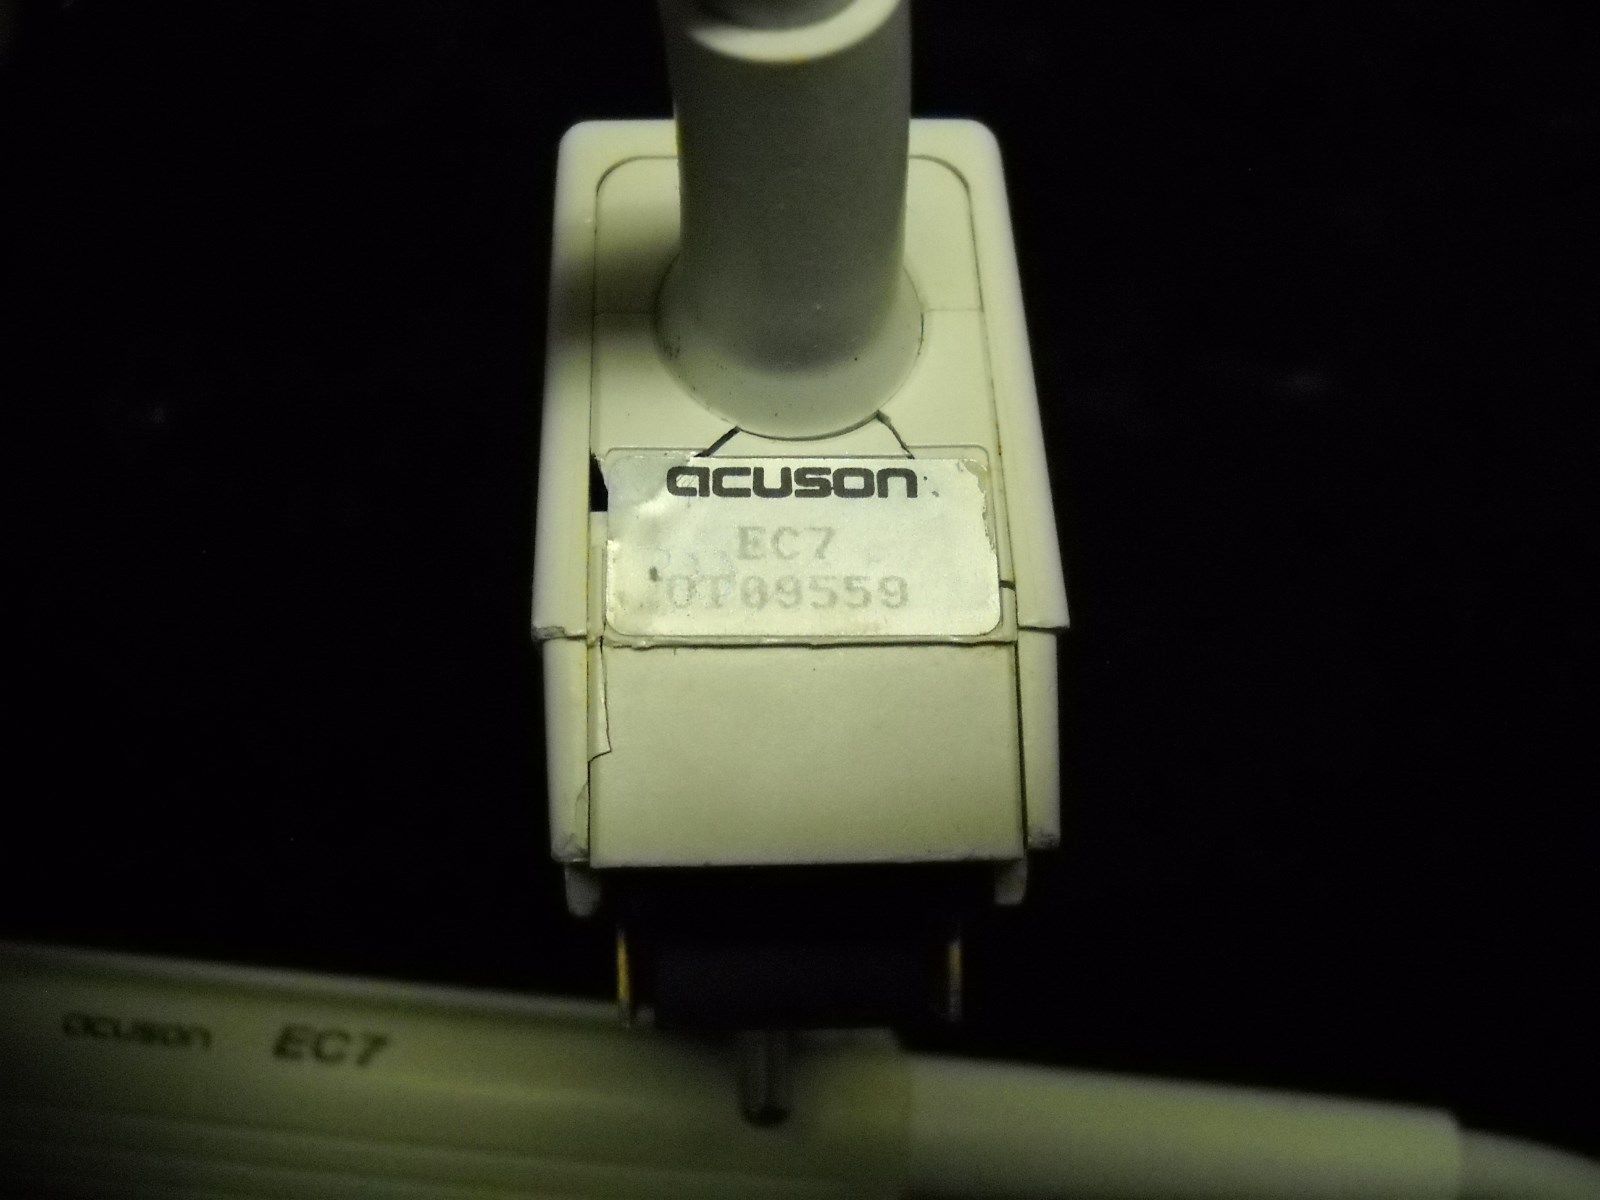 Acuson EC7 Ultrasound Transducer 5.0-7.0 MHZ Endocavity Conves Linear Array DIAGNOSTIC ULTRASOUND MACHINES FOR SALE